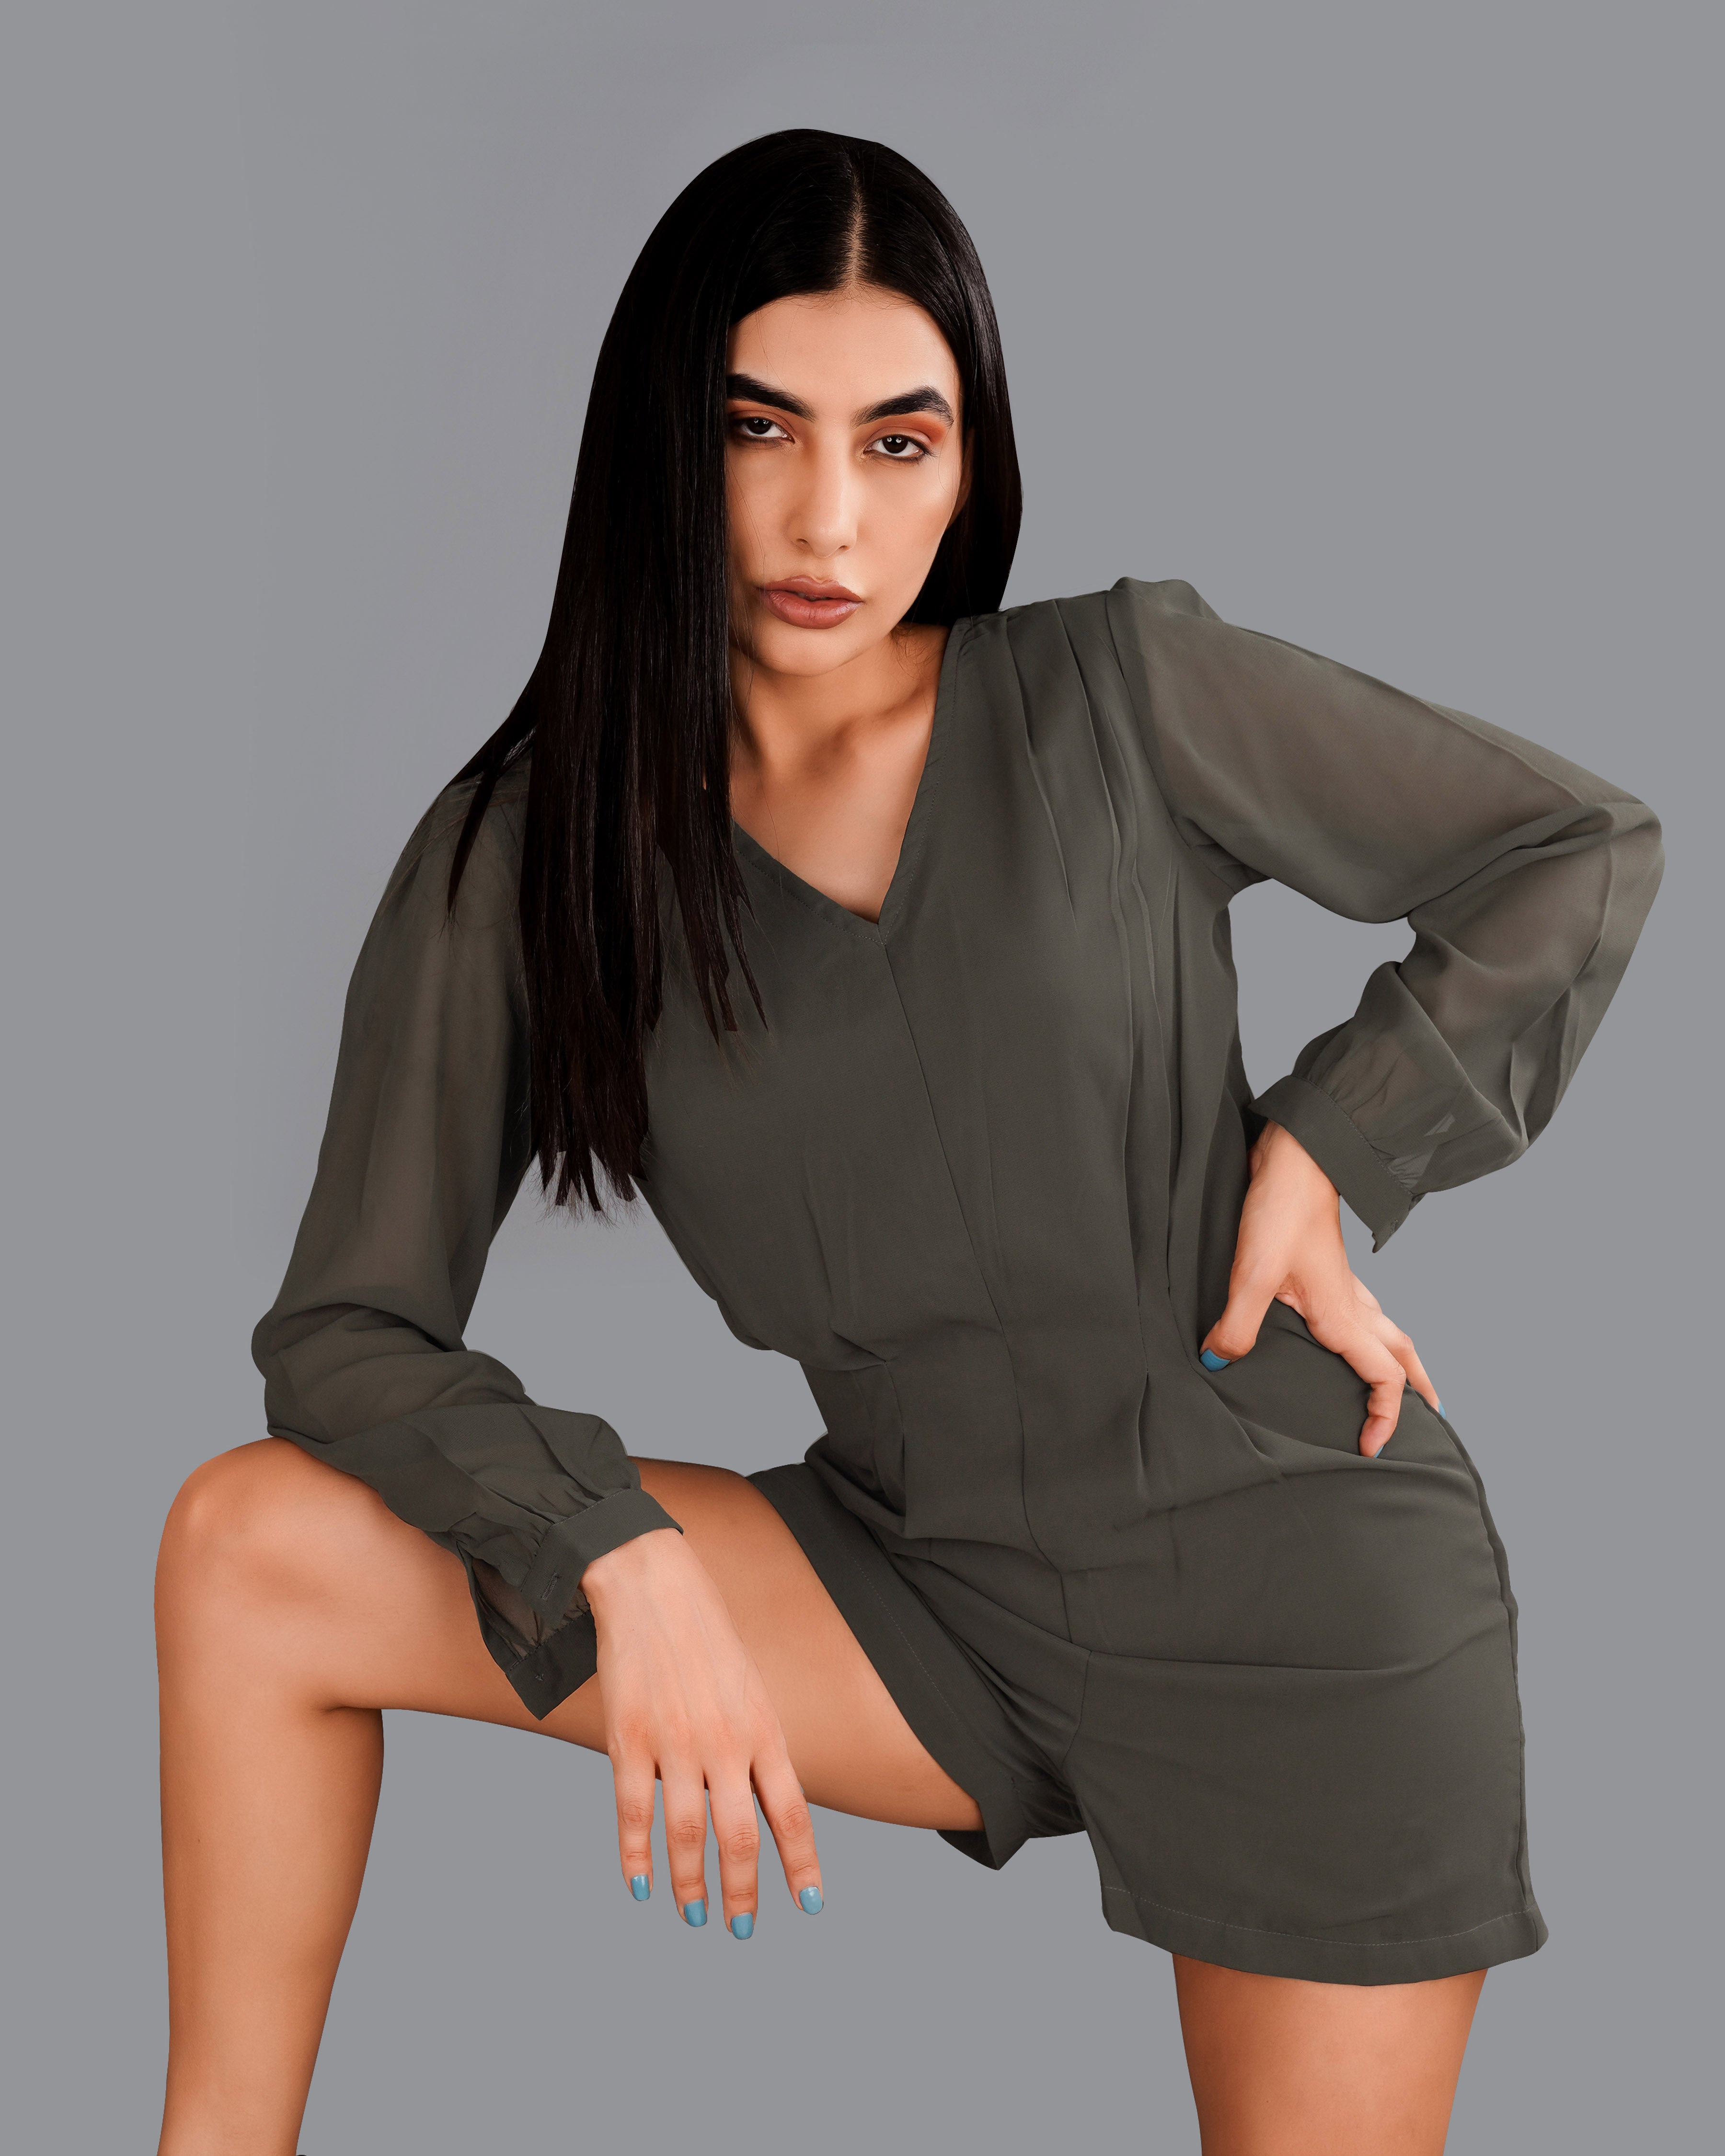 Gravel Gray Jumpsuit WD009-32, WD009-34, WD009-36, WD009-38, WD009-40, WD009-42